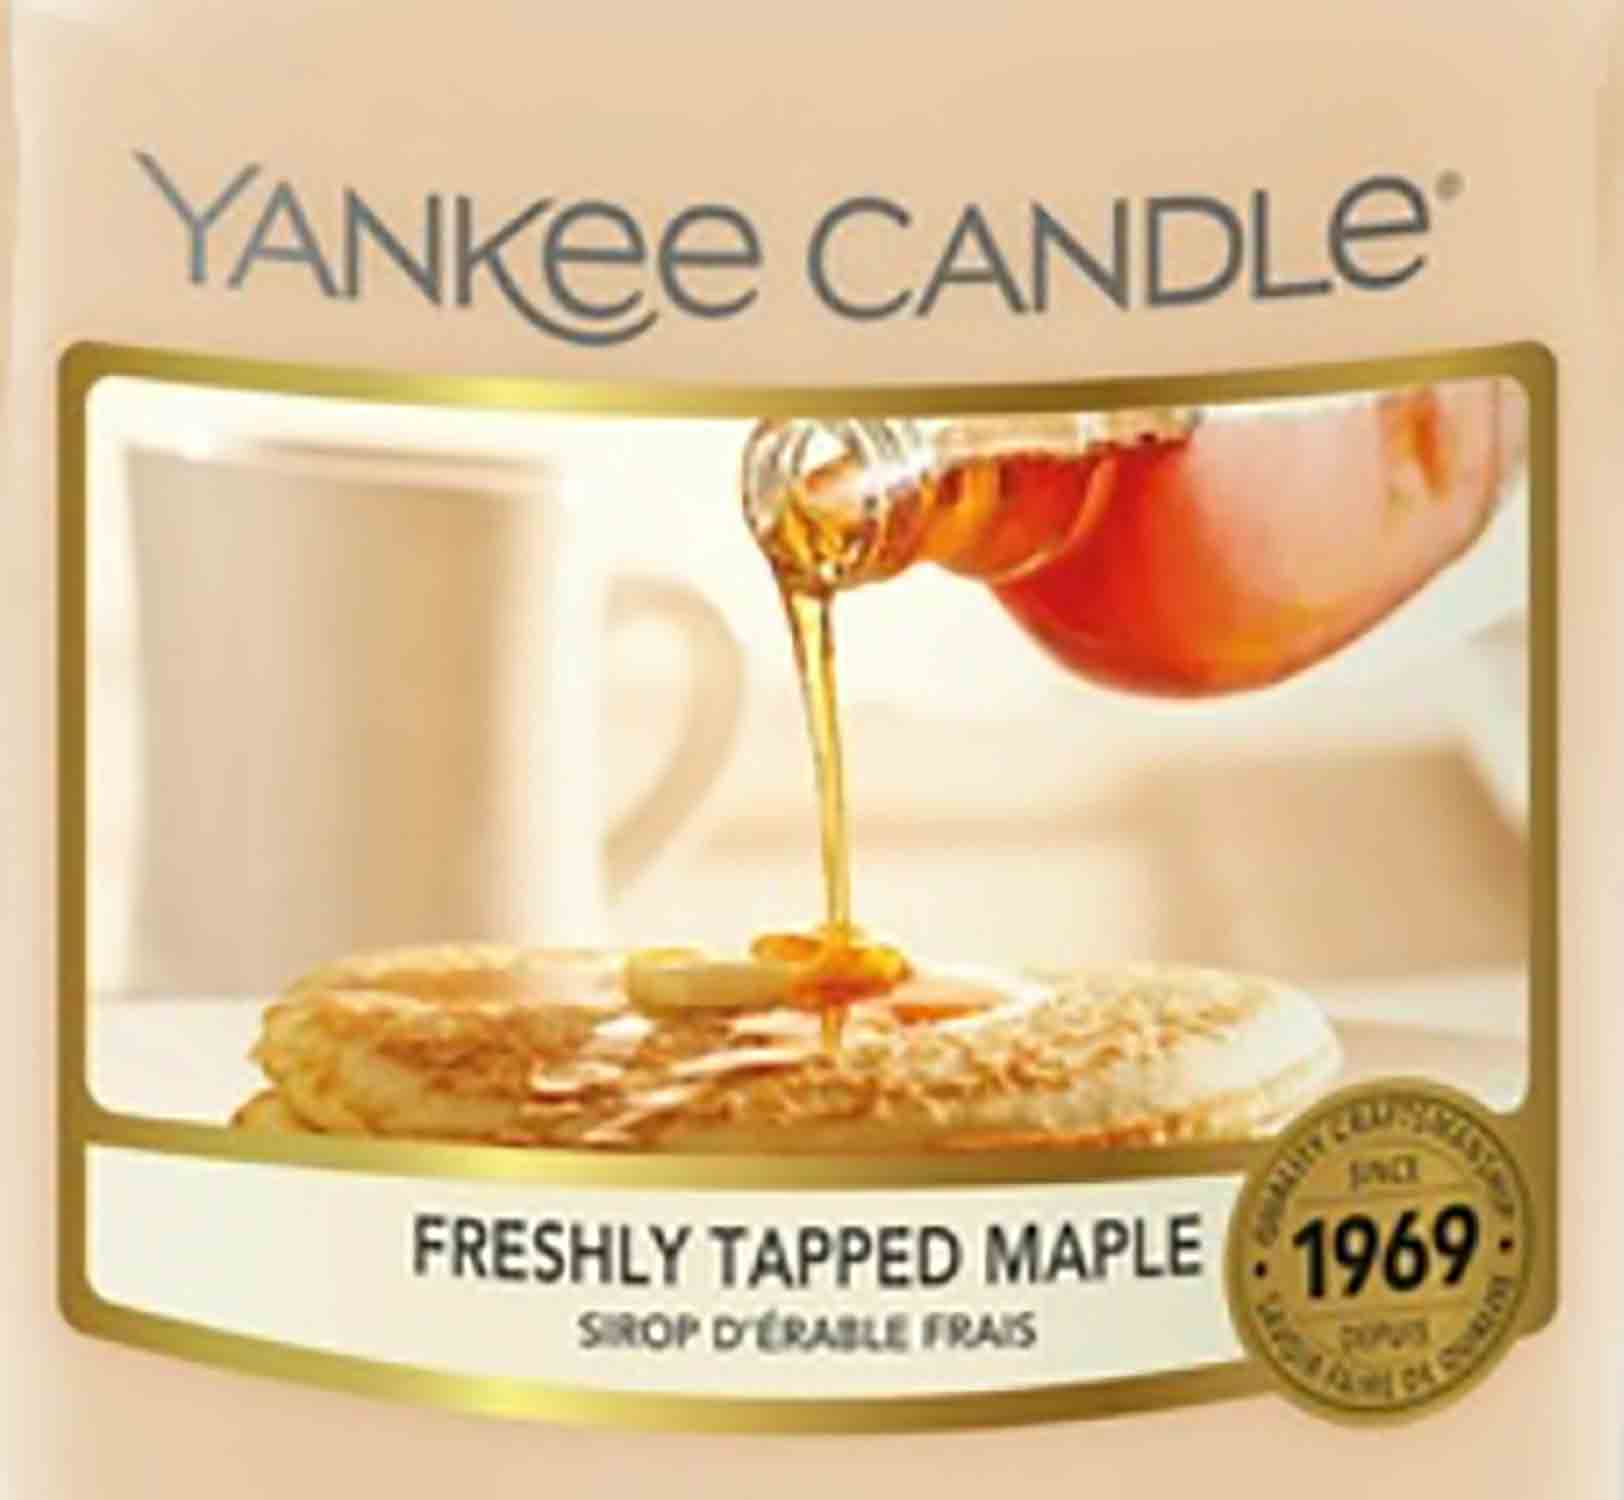 Yankee Candle Freshly Tapped Maple 22 g - Crumble vosk